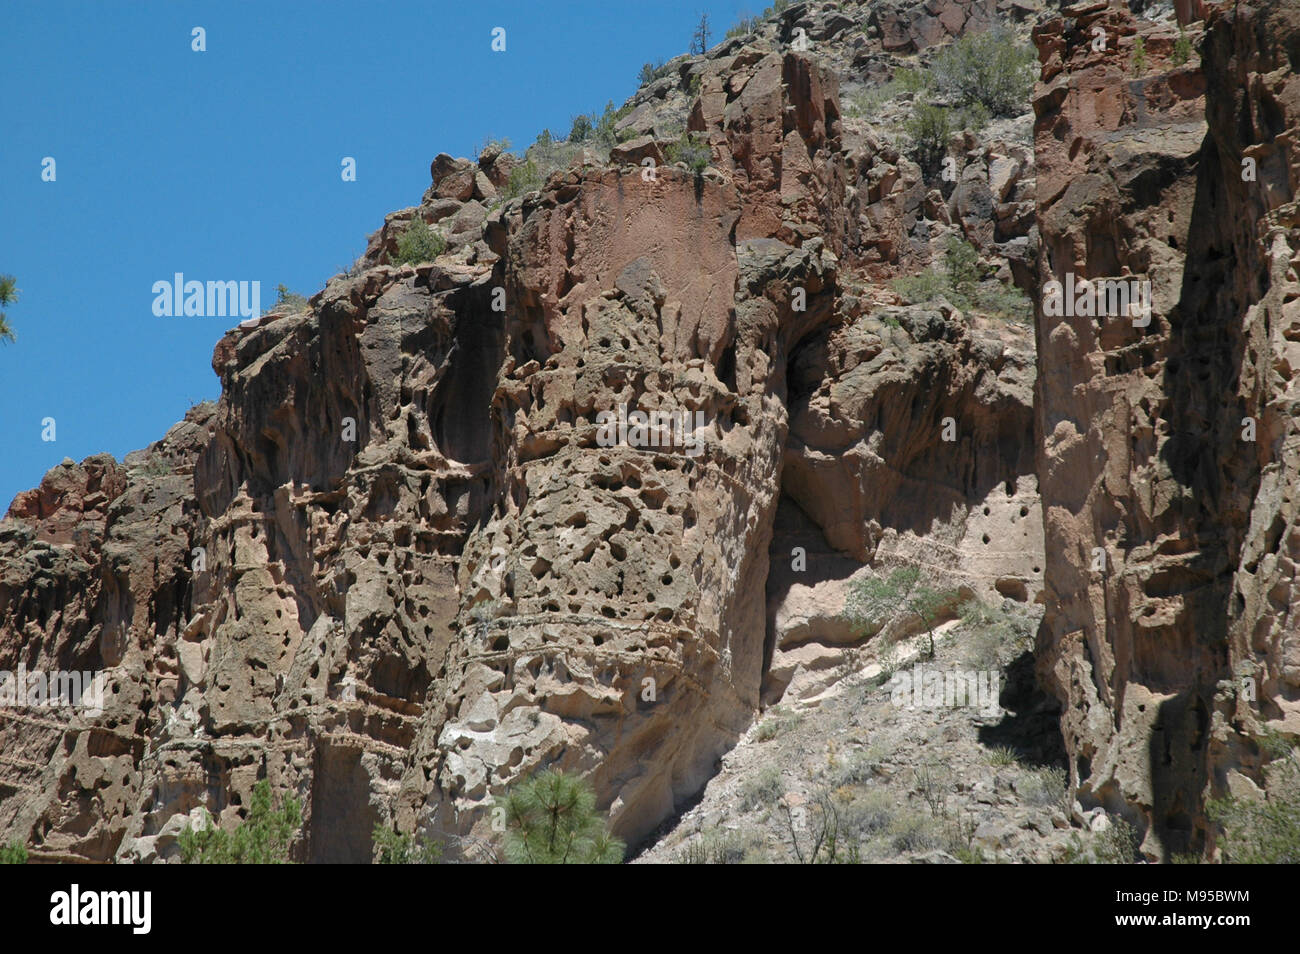 The Alcove Trail in the Bandelier National Monument exhibits examples of Volcanic Tuff rock. Stock Photo